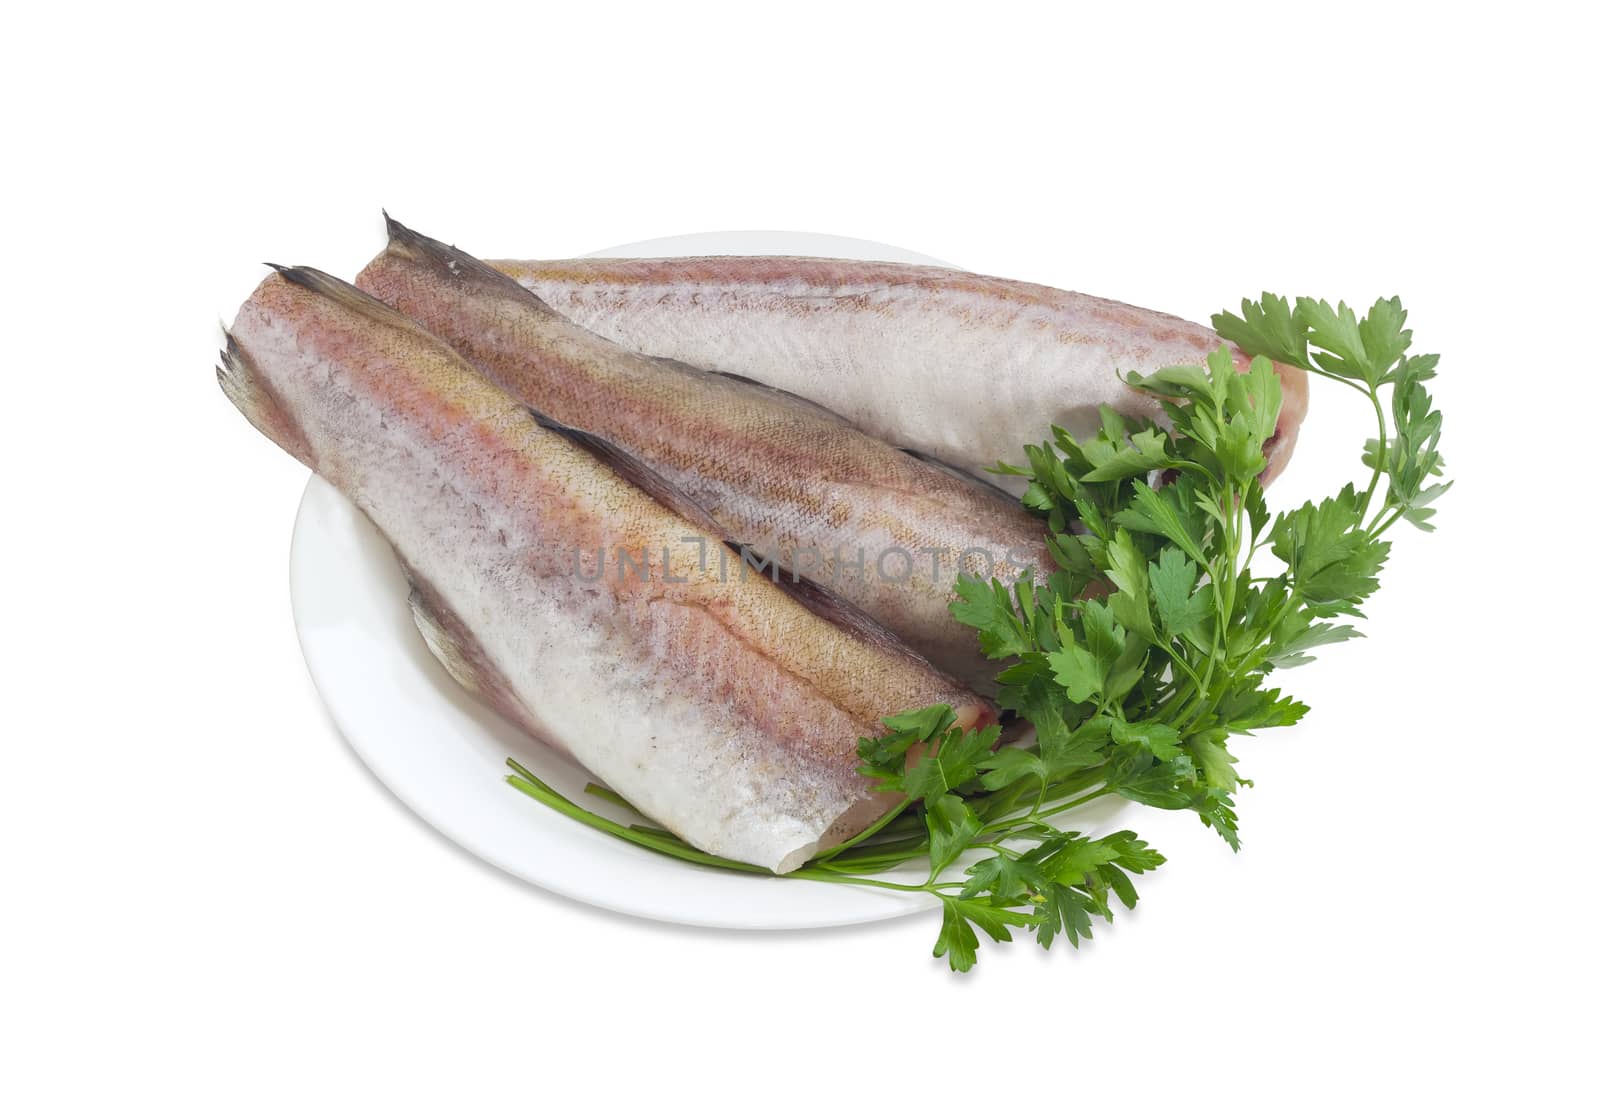 Three uncooked carcasses of the Alaska pollock without of head and tail and bundle of parsley on a white dish on a white background
